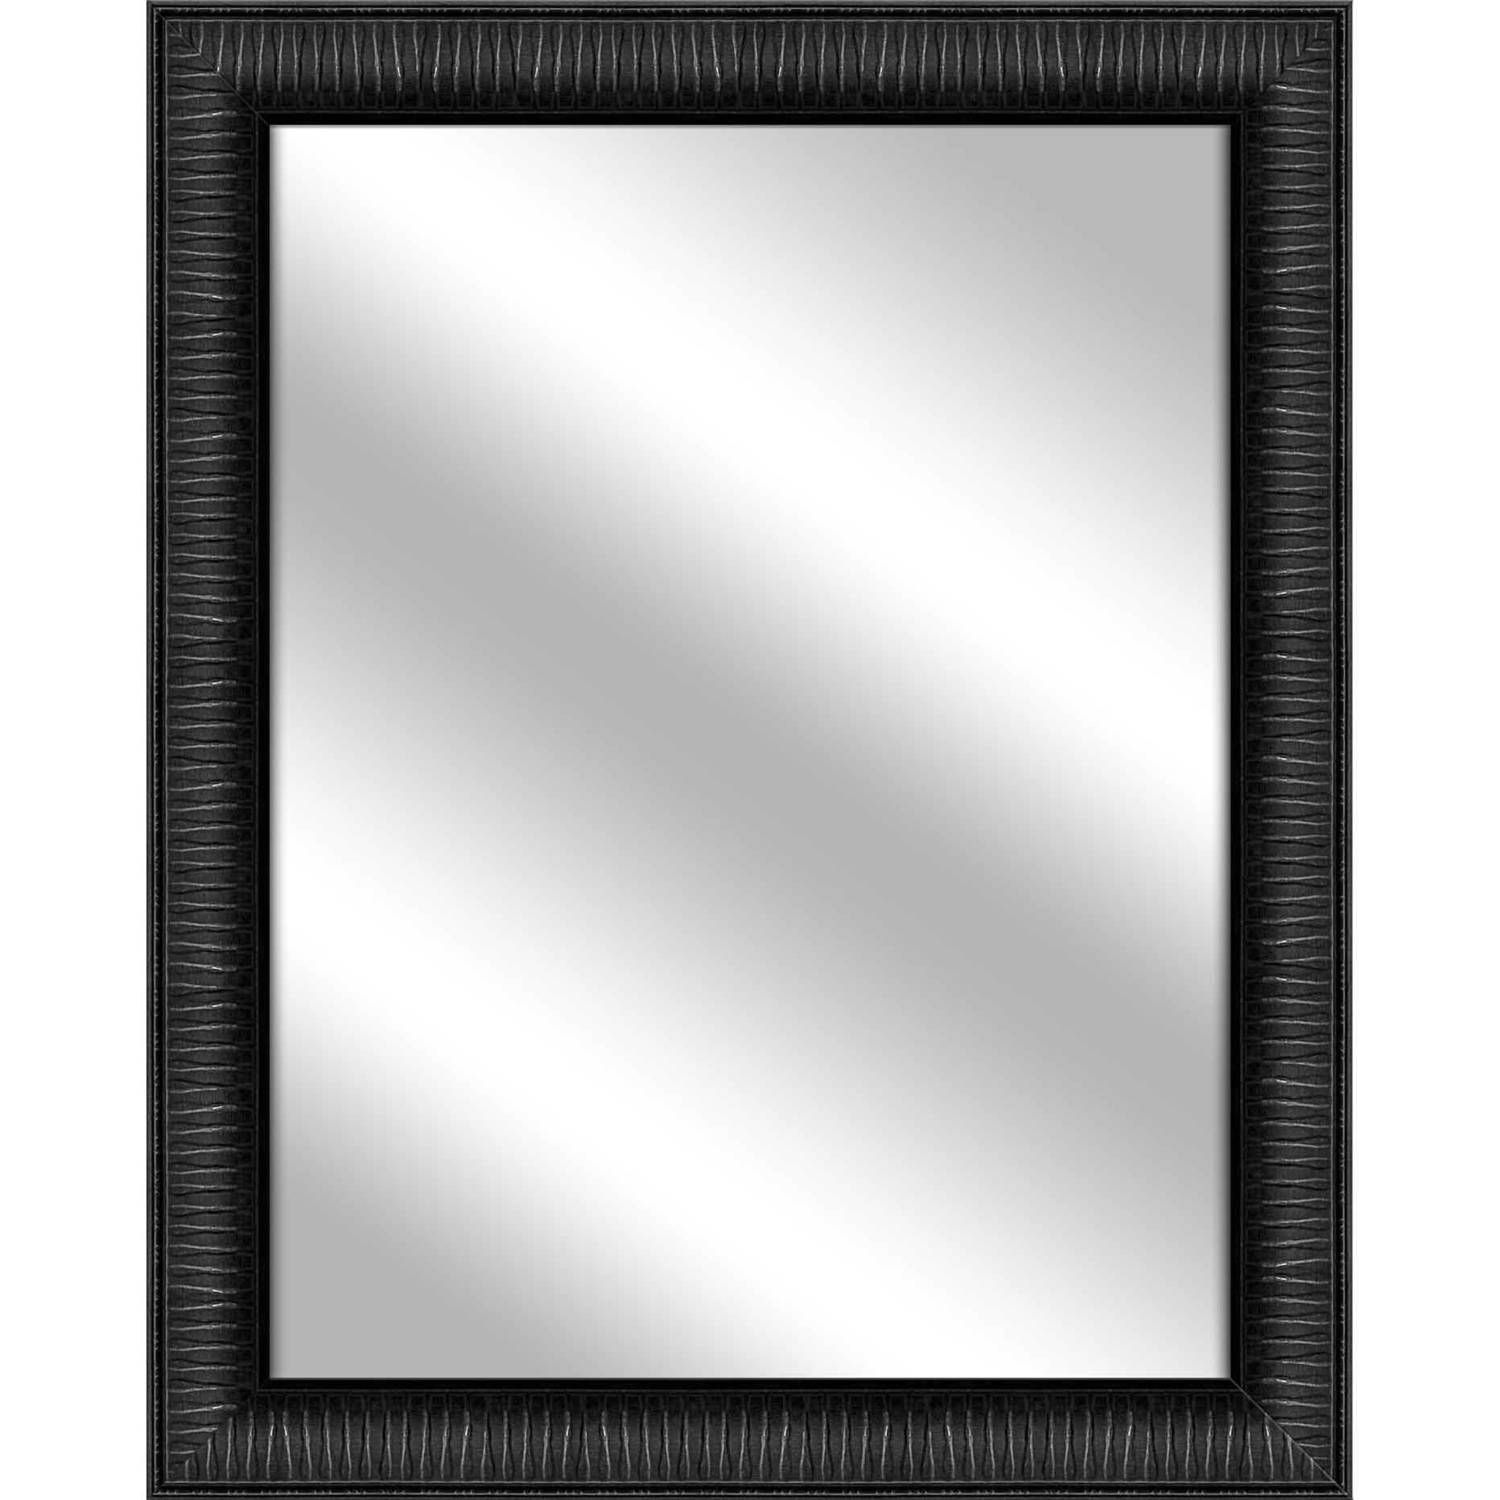 Ptm Images Forte Ready To Hang Framed Mirror, Wood Grain Black Regarding Black Wood Wall Mirrors (View 8 of 15)